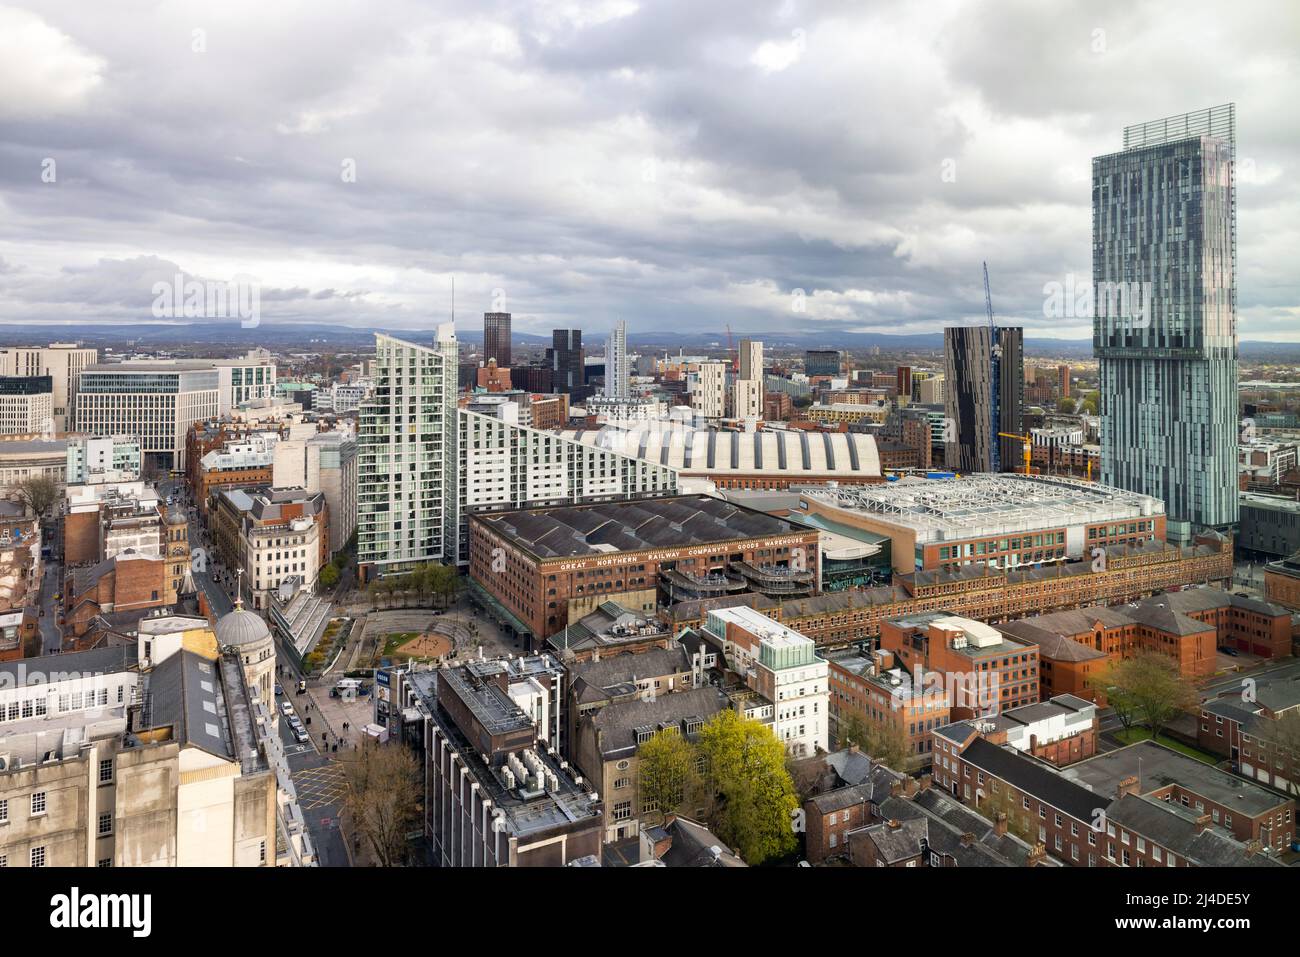 Manchester views. Beetham tower, Deansgate and Great Northern Warehouse. Stock Photo